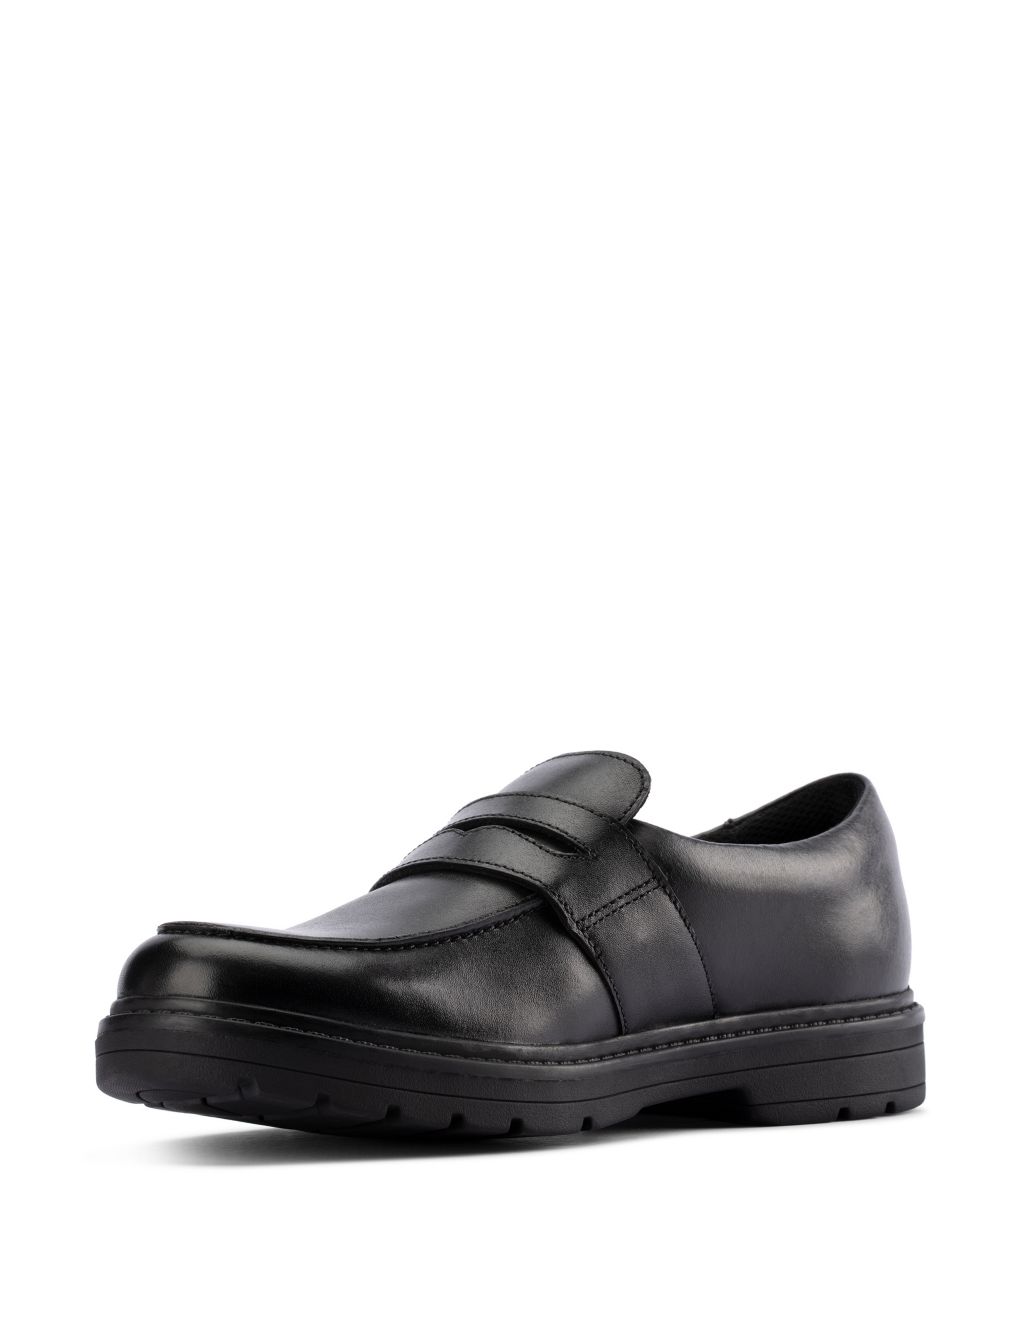 Kids' Leather Slip-On Loafers (3 Small - 7 Small) image 3